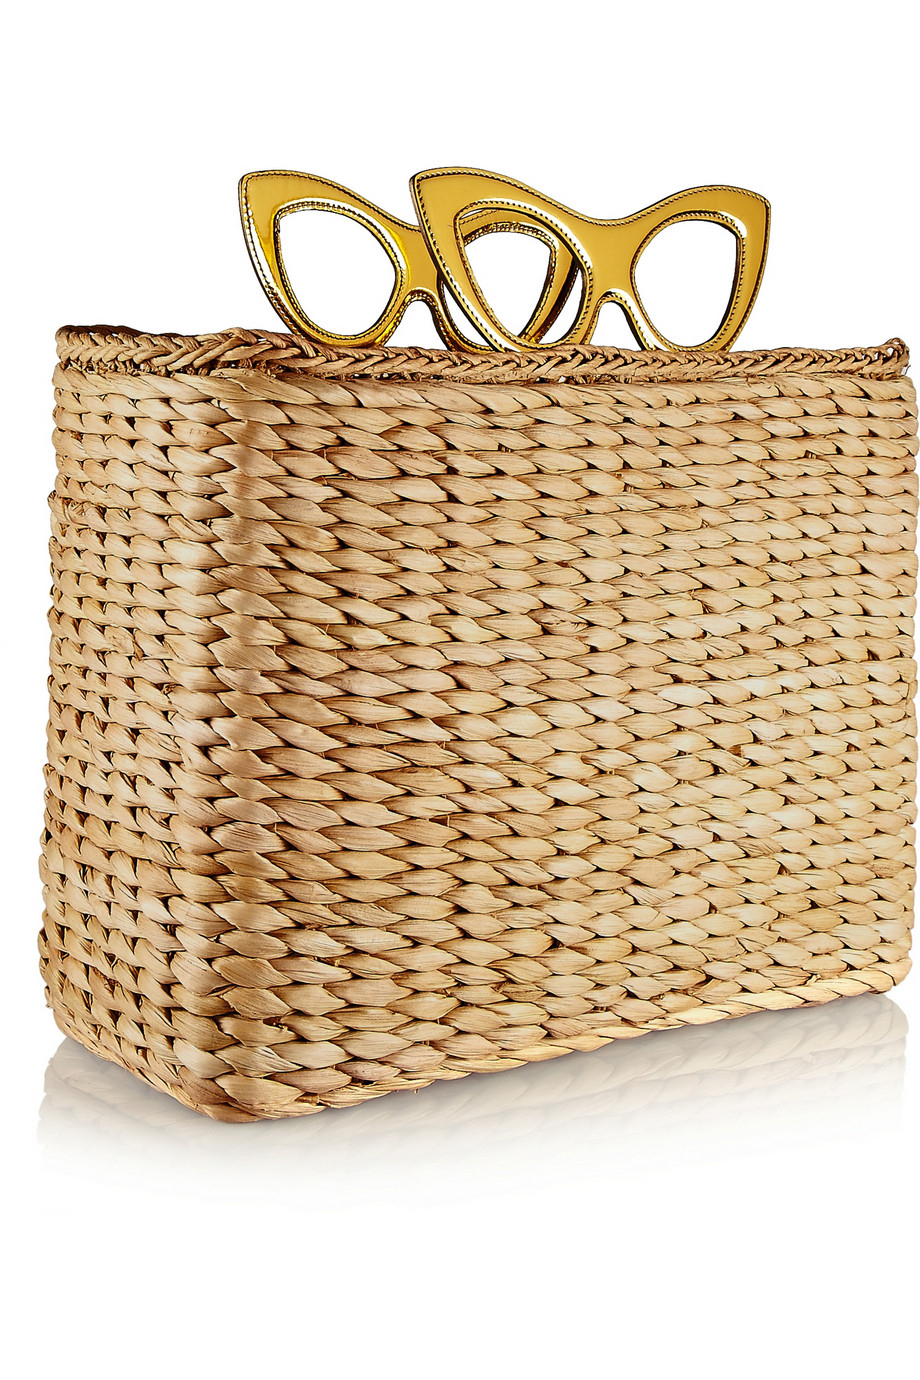 Charlotte Olympia Sunny Basket Leathertrimmed Raffia Tote in Gold | Lyst